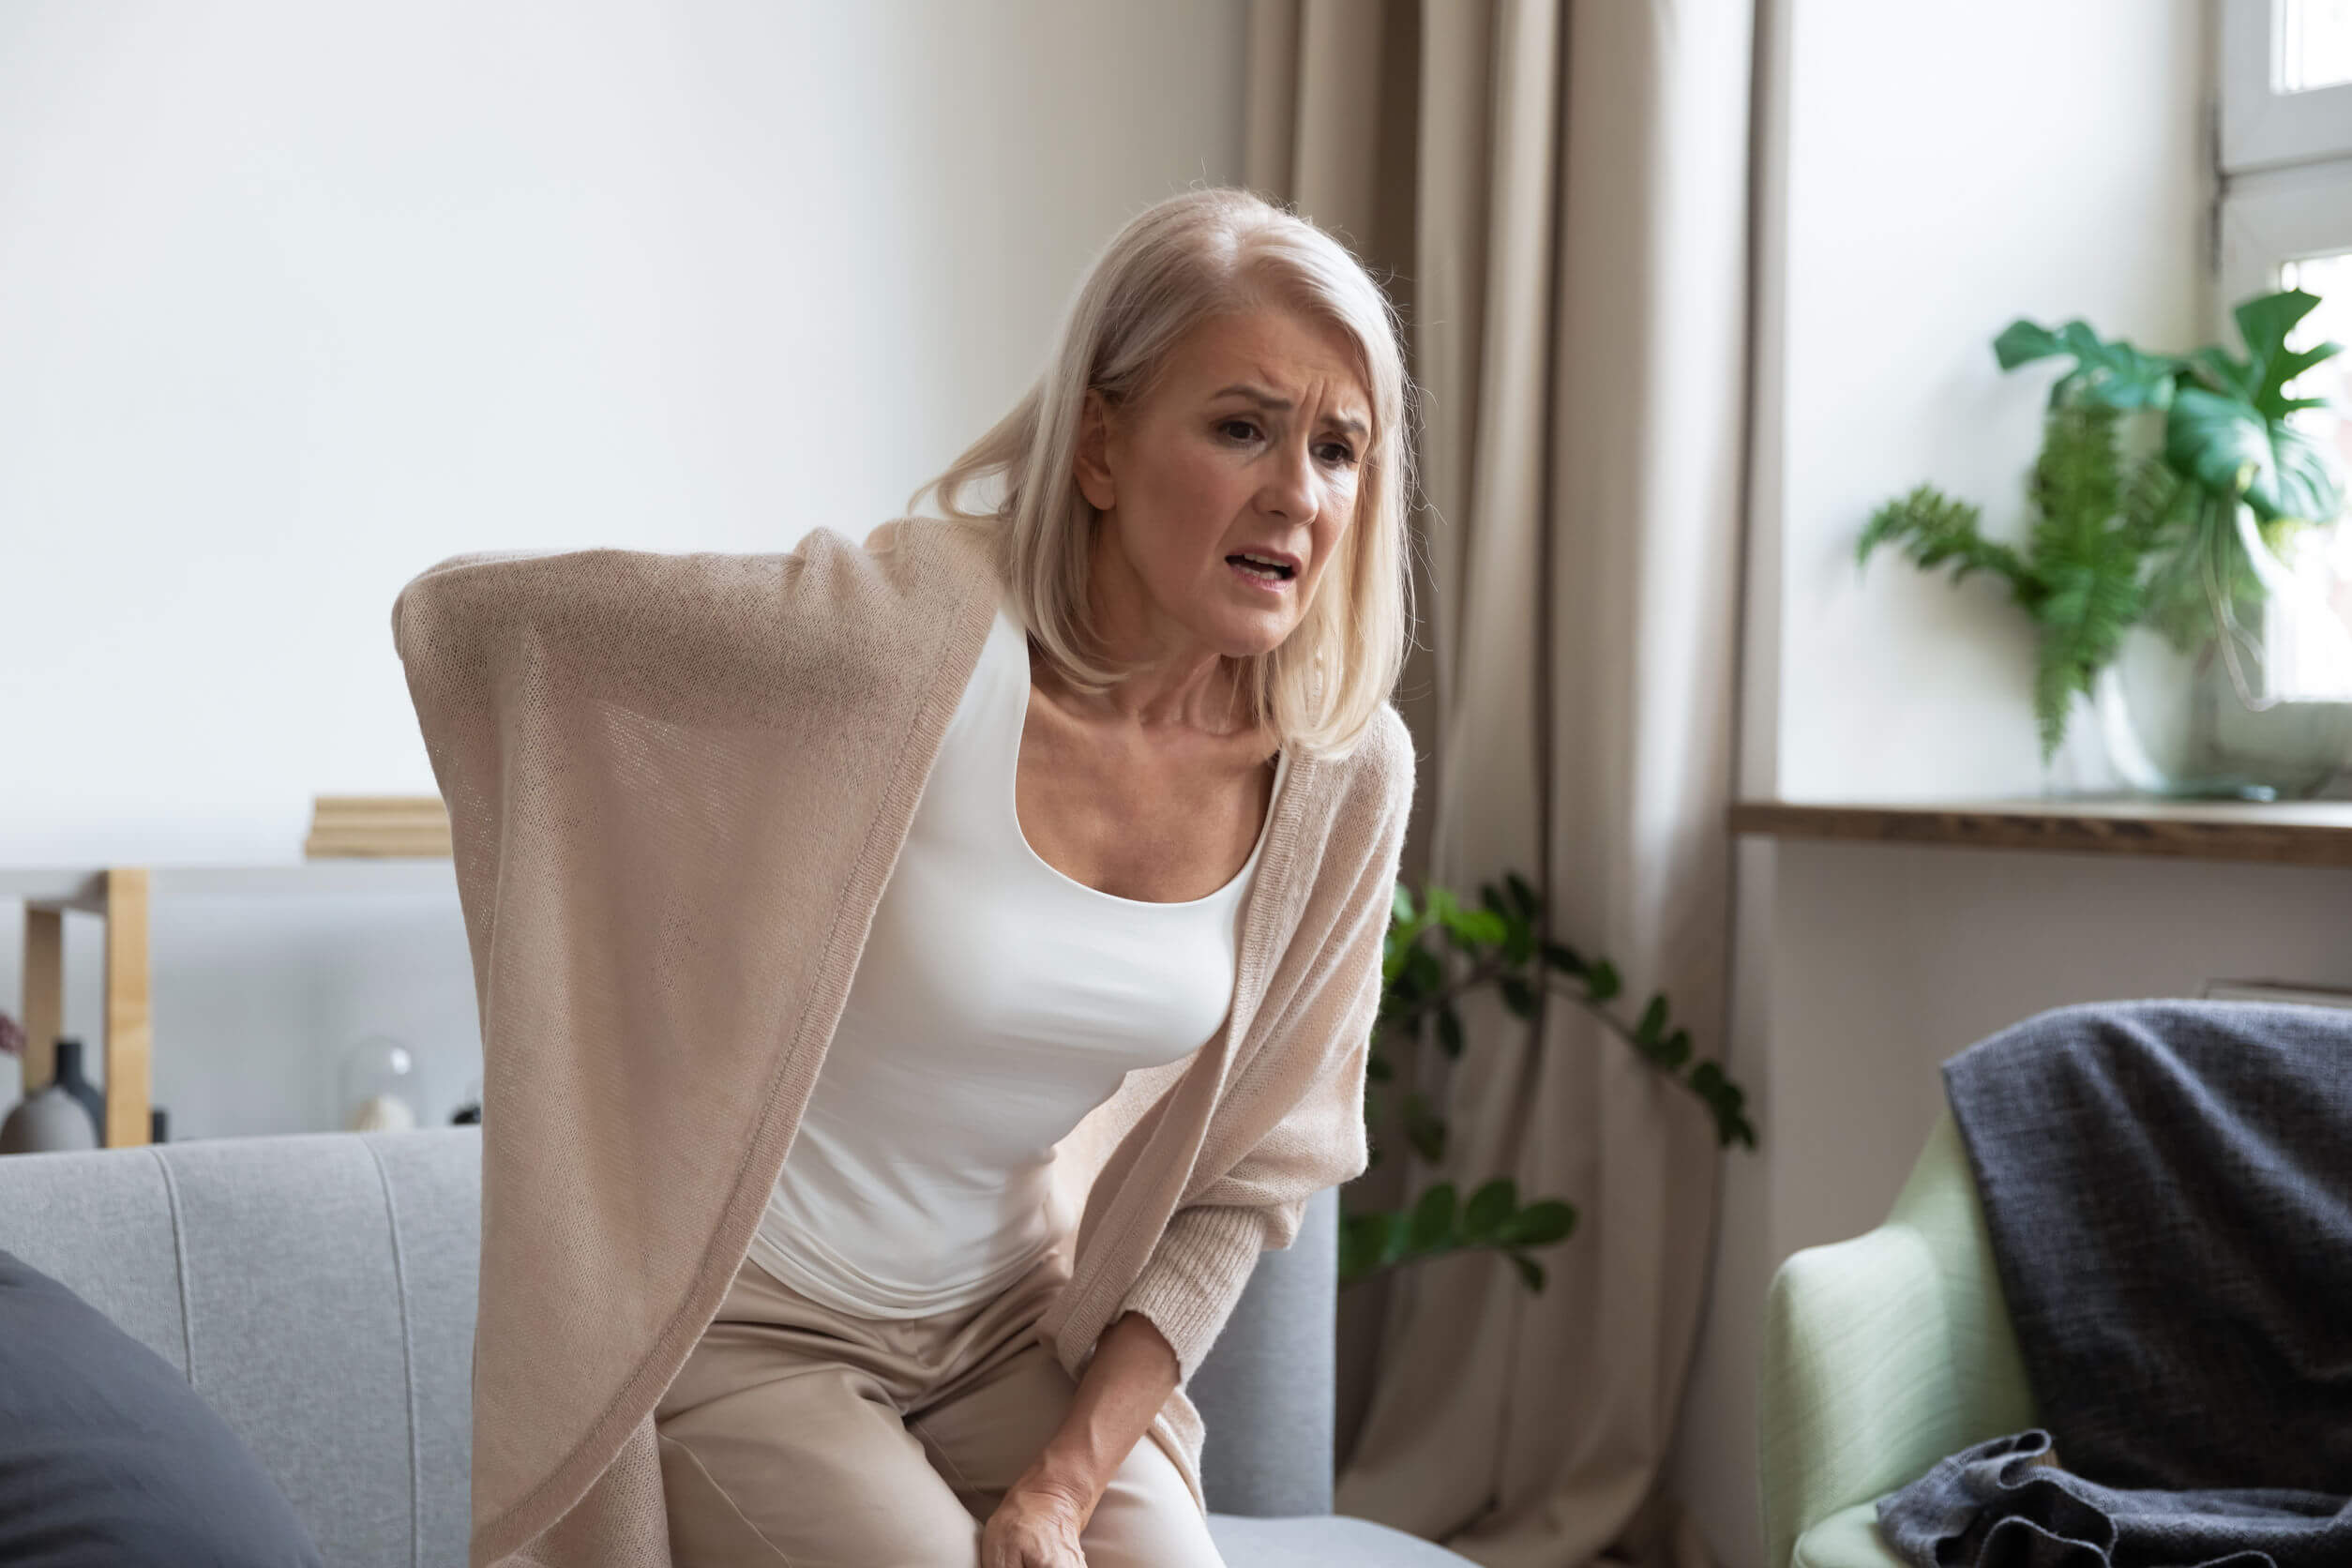 Treatment for menopause tcovers osteoporosis.